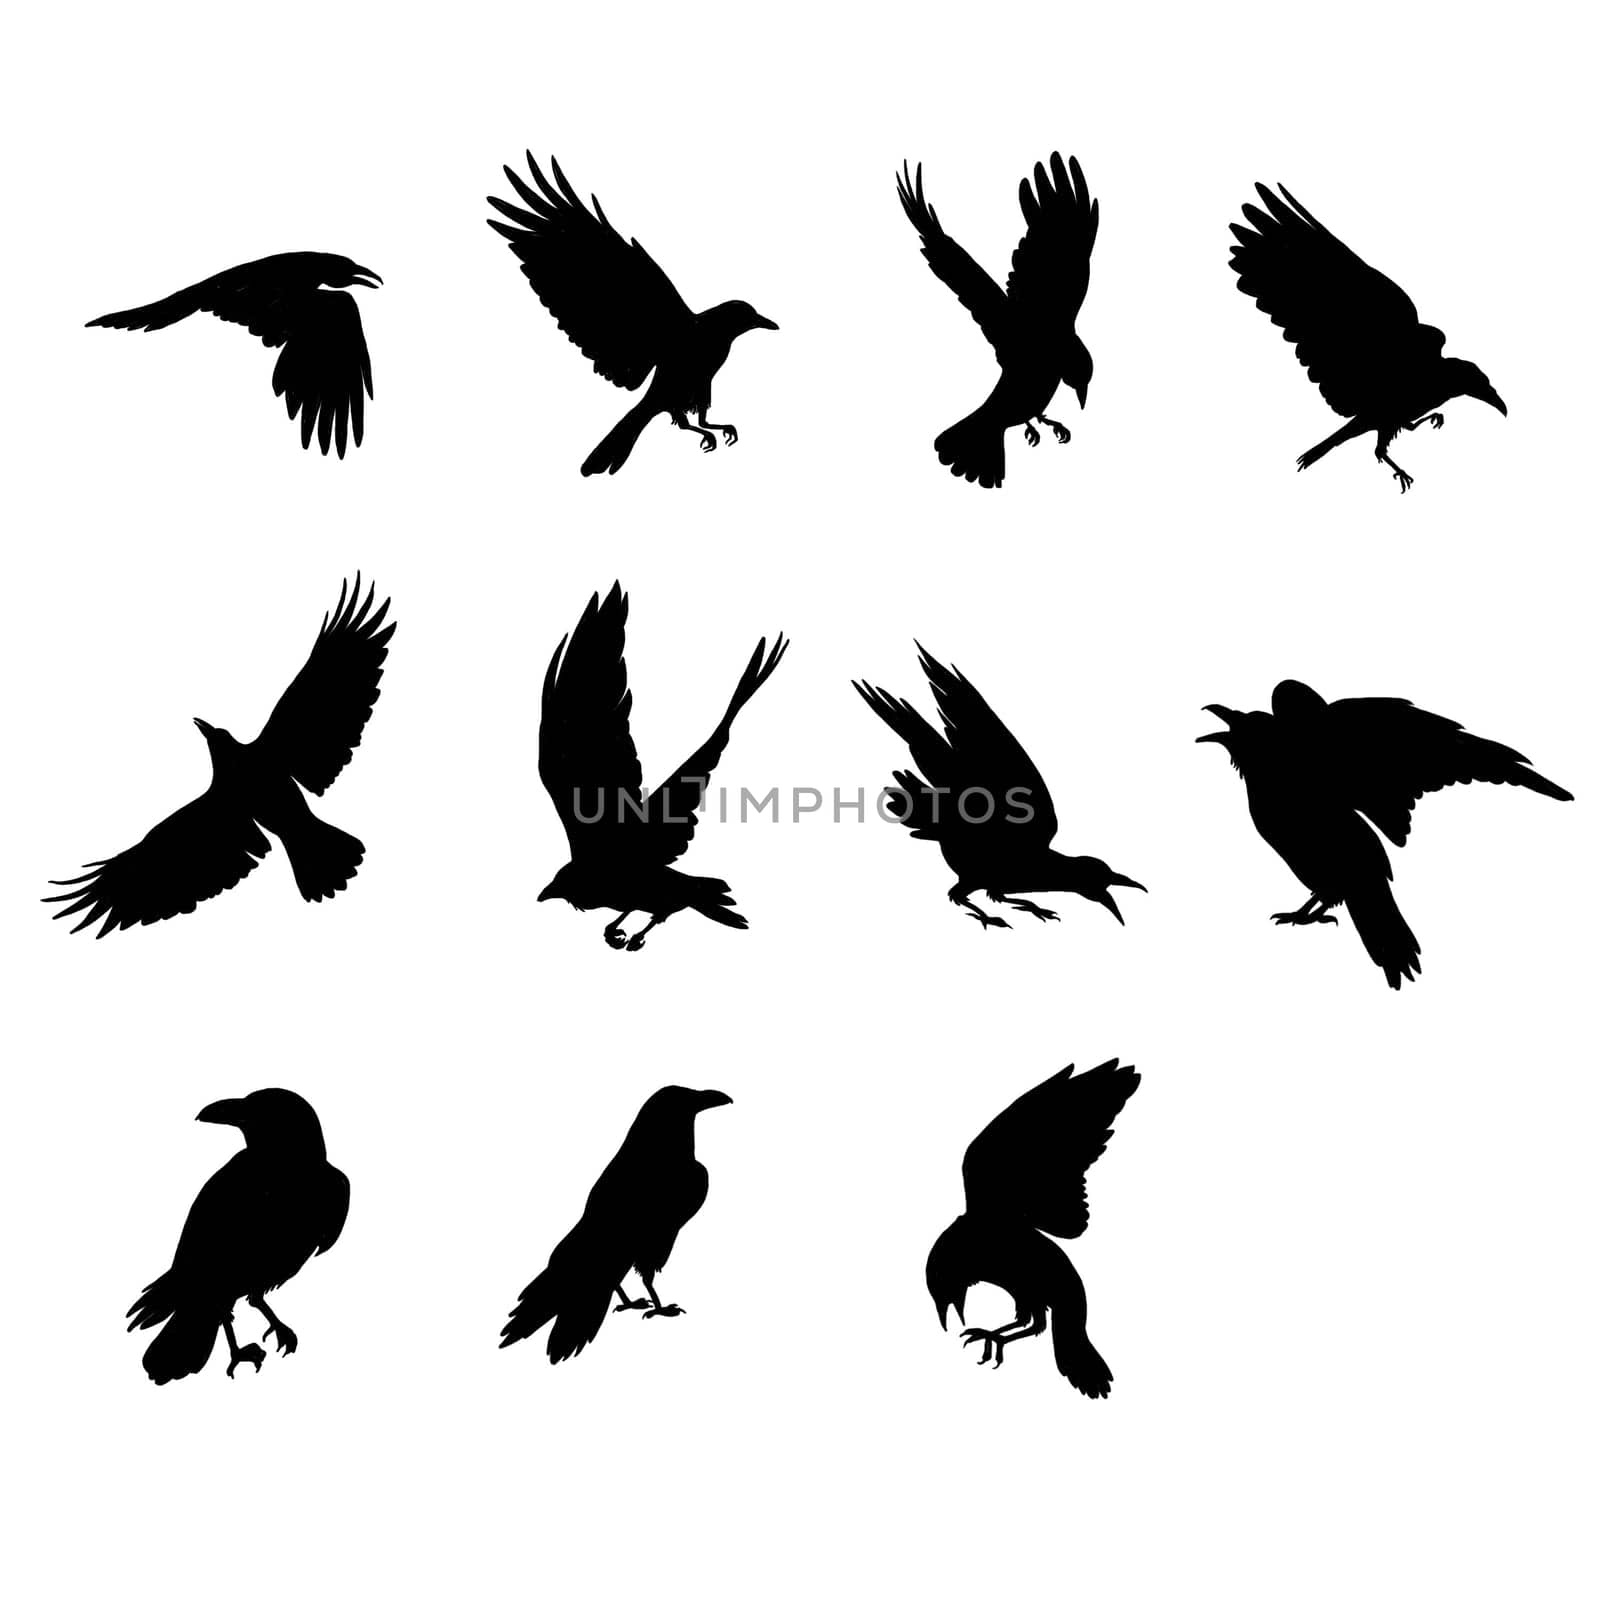 Crow, raven bird silhouettes set. Hand drawn illustration isolated on white by fireFLYart